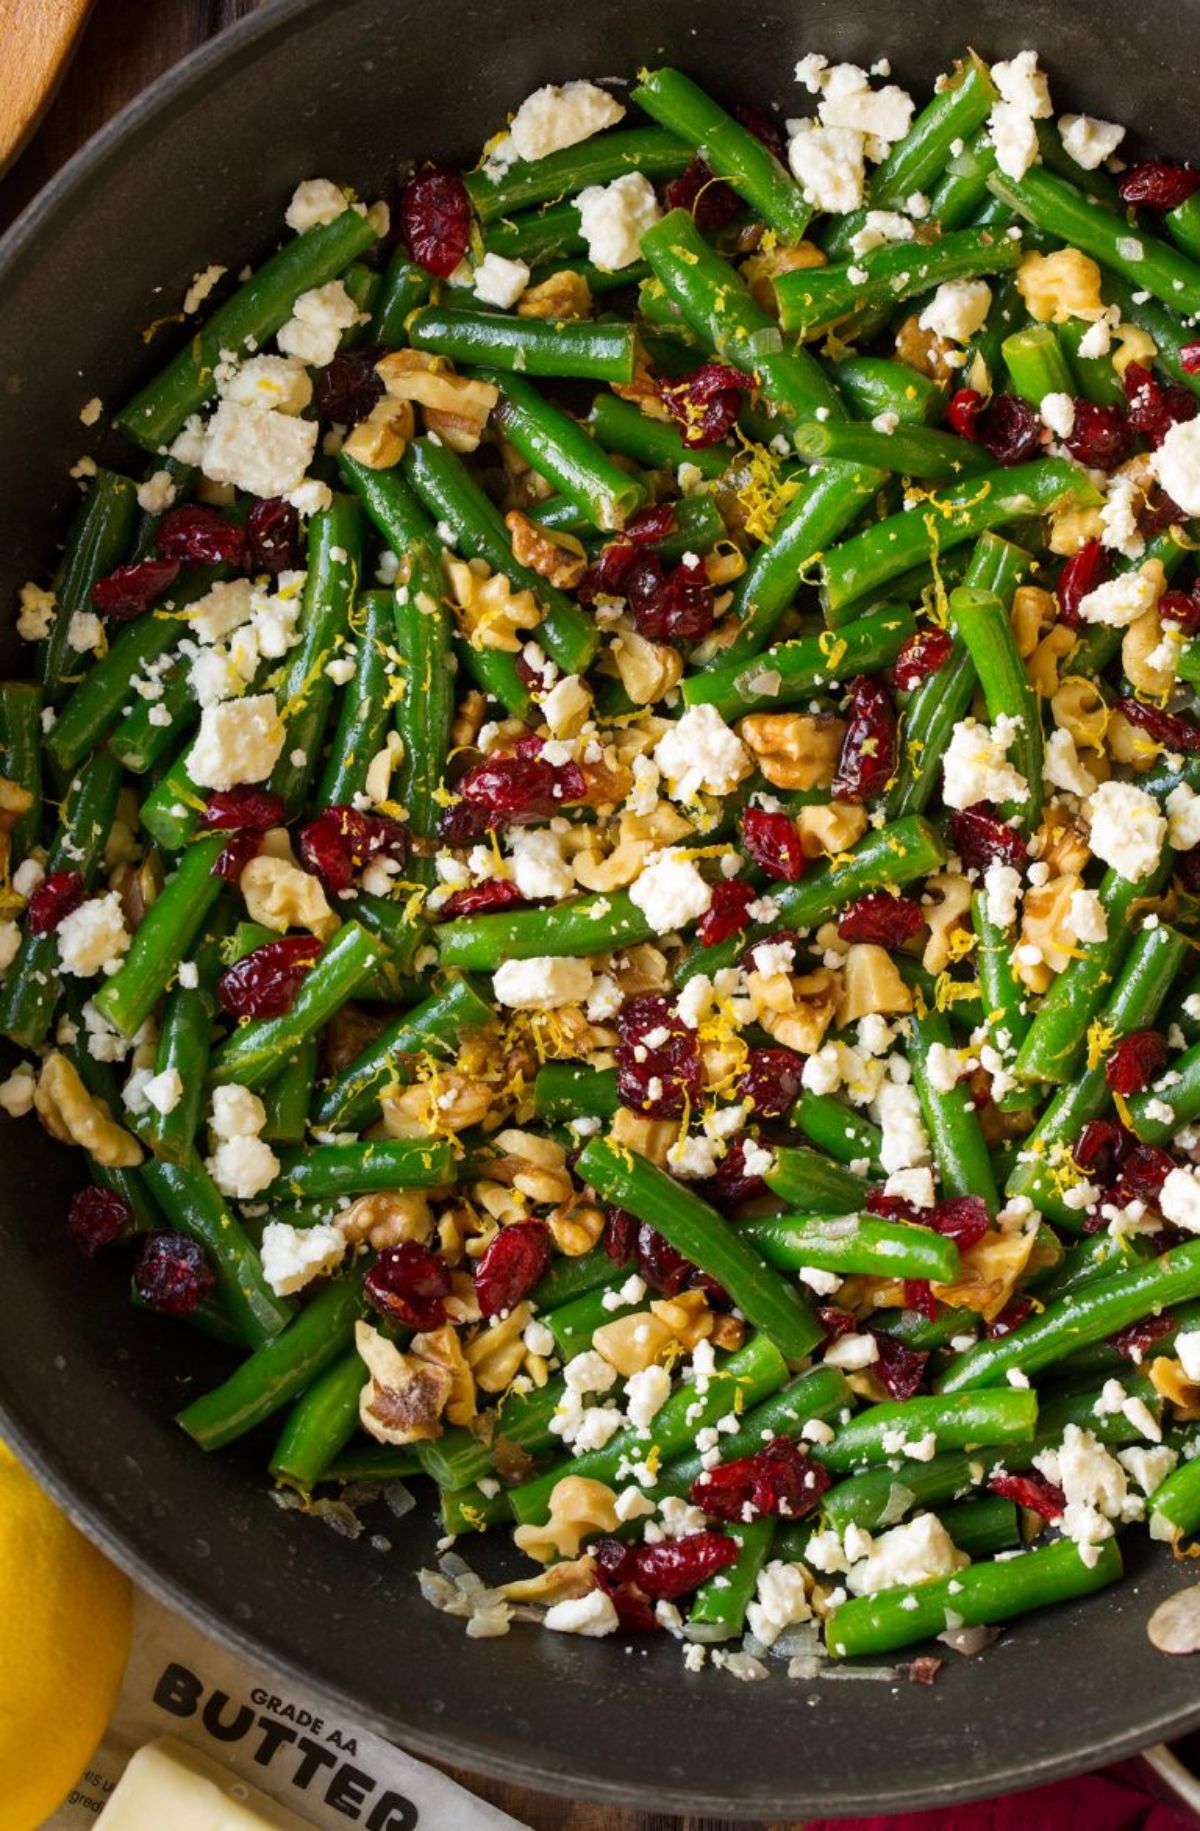 Yummy Lemon Butter Green Beans With Cranberries, Walnuts, and Feta in a  black bowl.